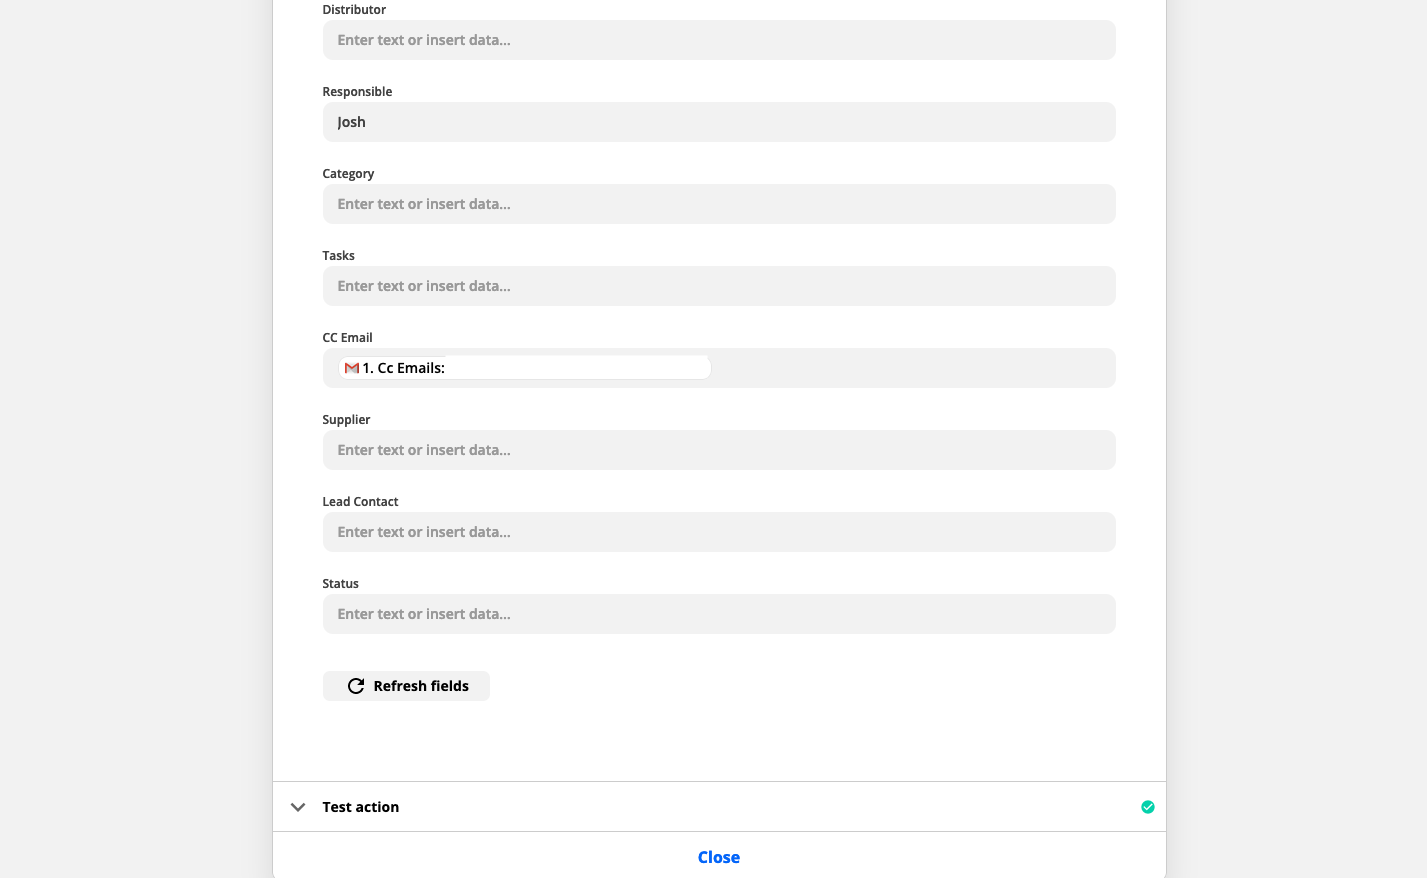 zapier airtable and gmail